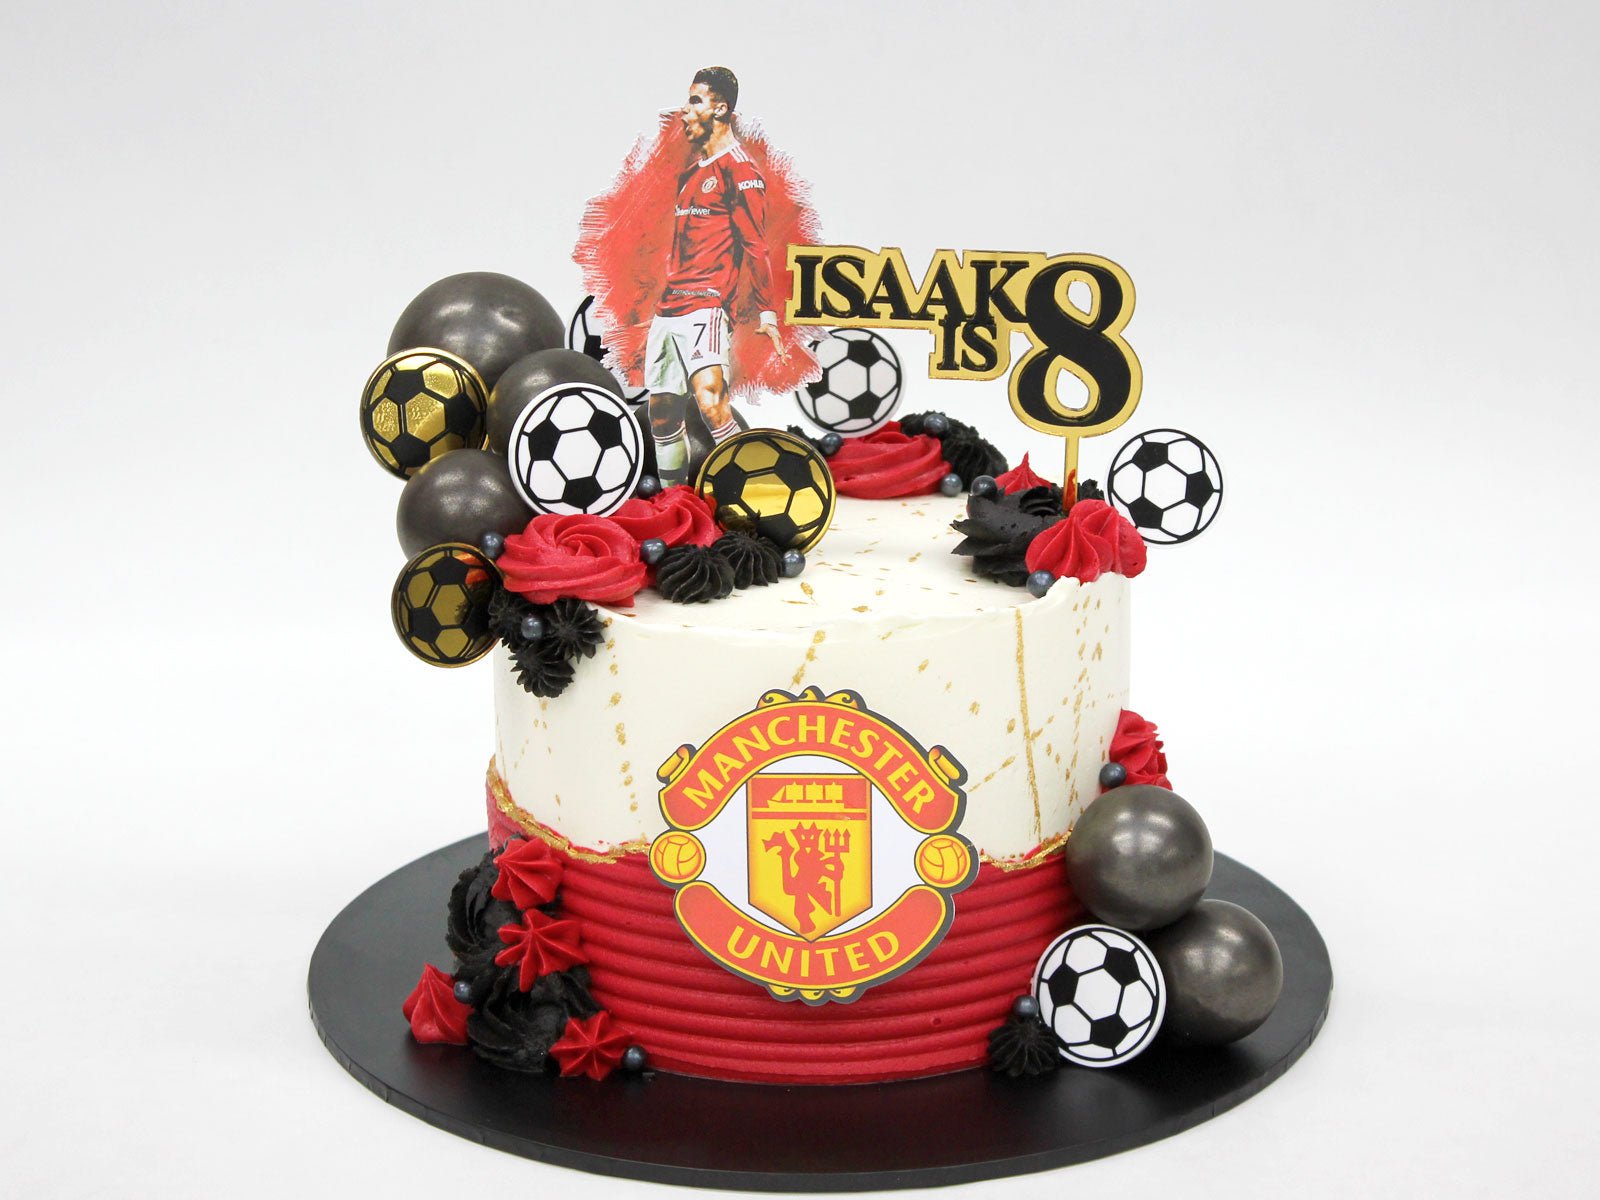 Cake-a-licious - Football ⚽️ themed cake for Teddy featuring his favourite  team Man Utd & his favourite players shirt Ronaldo Chocolate 🍫 sponge cake  with Nutella 🌰 buttercream 😋 | فېسبوک